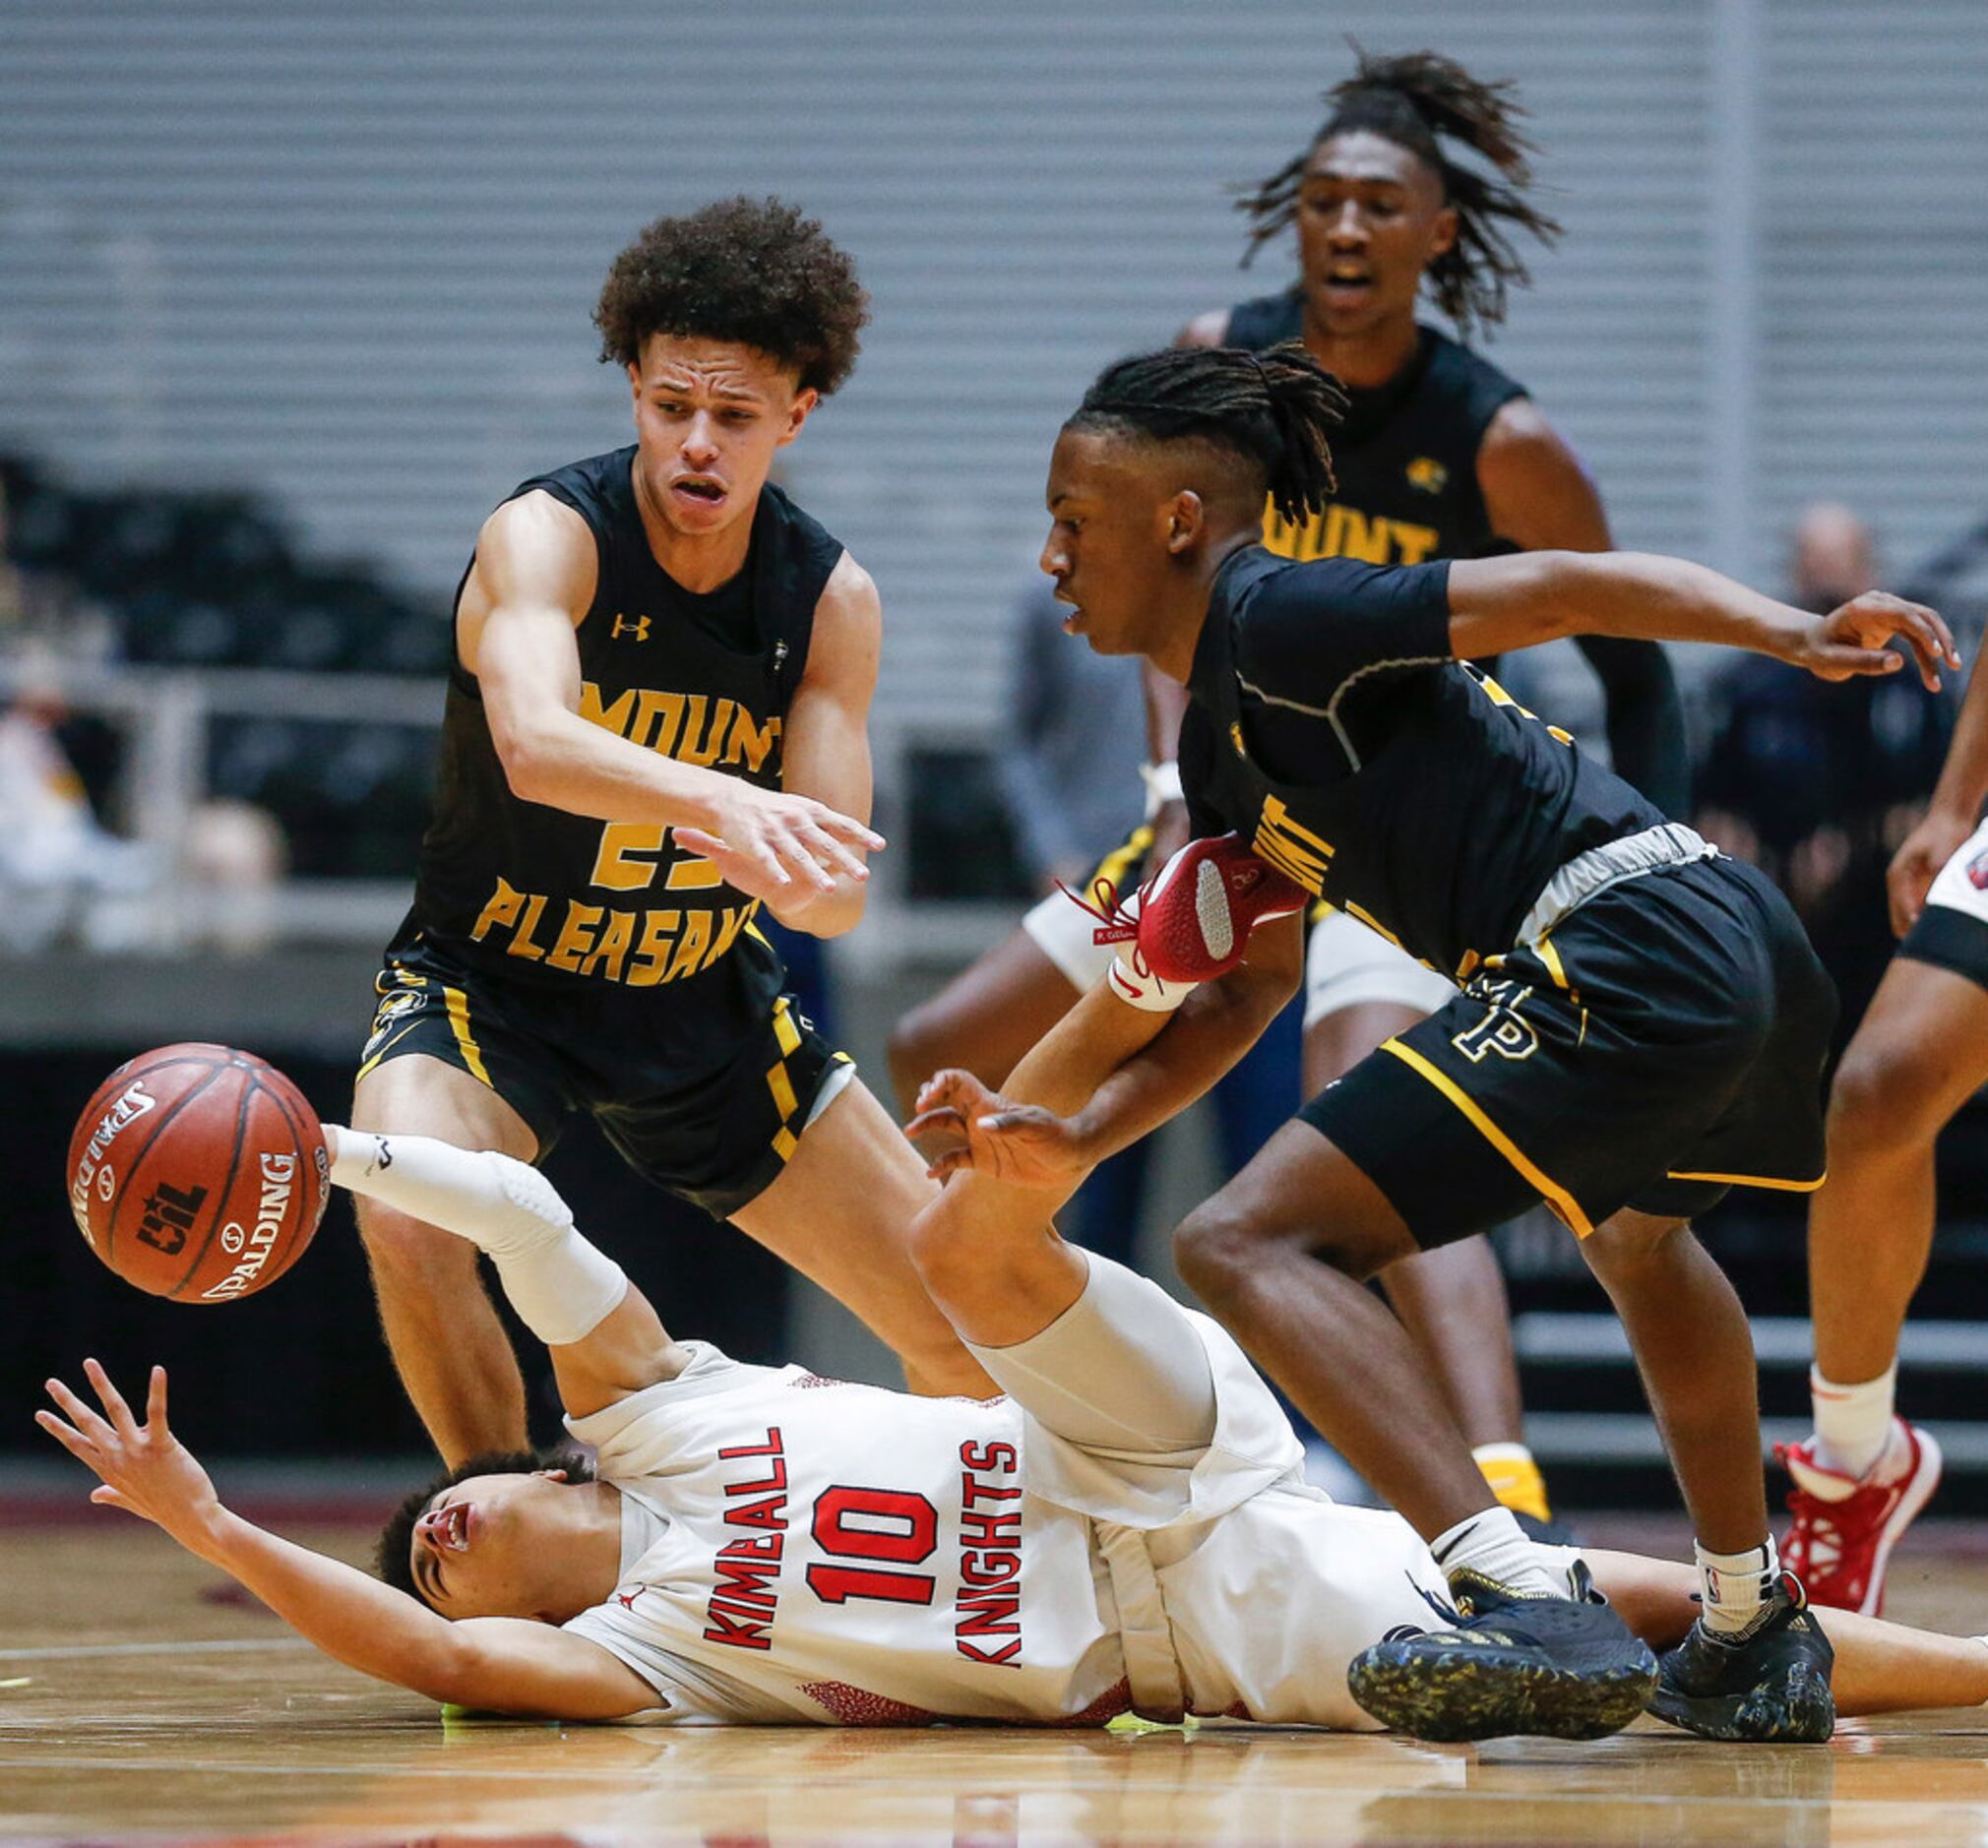 Kimball's Jayden Blair (10) reaches to recover a loose ball against Mount Pleasant's Payton...